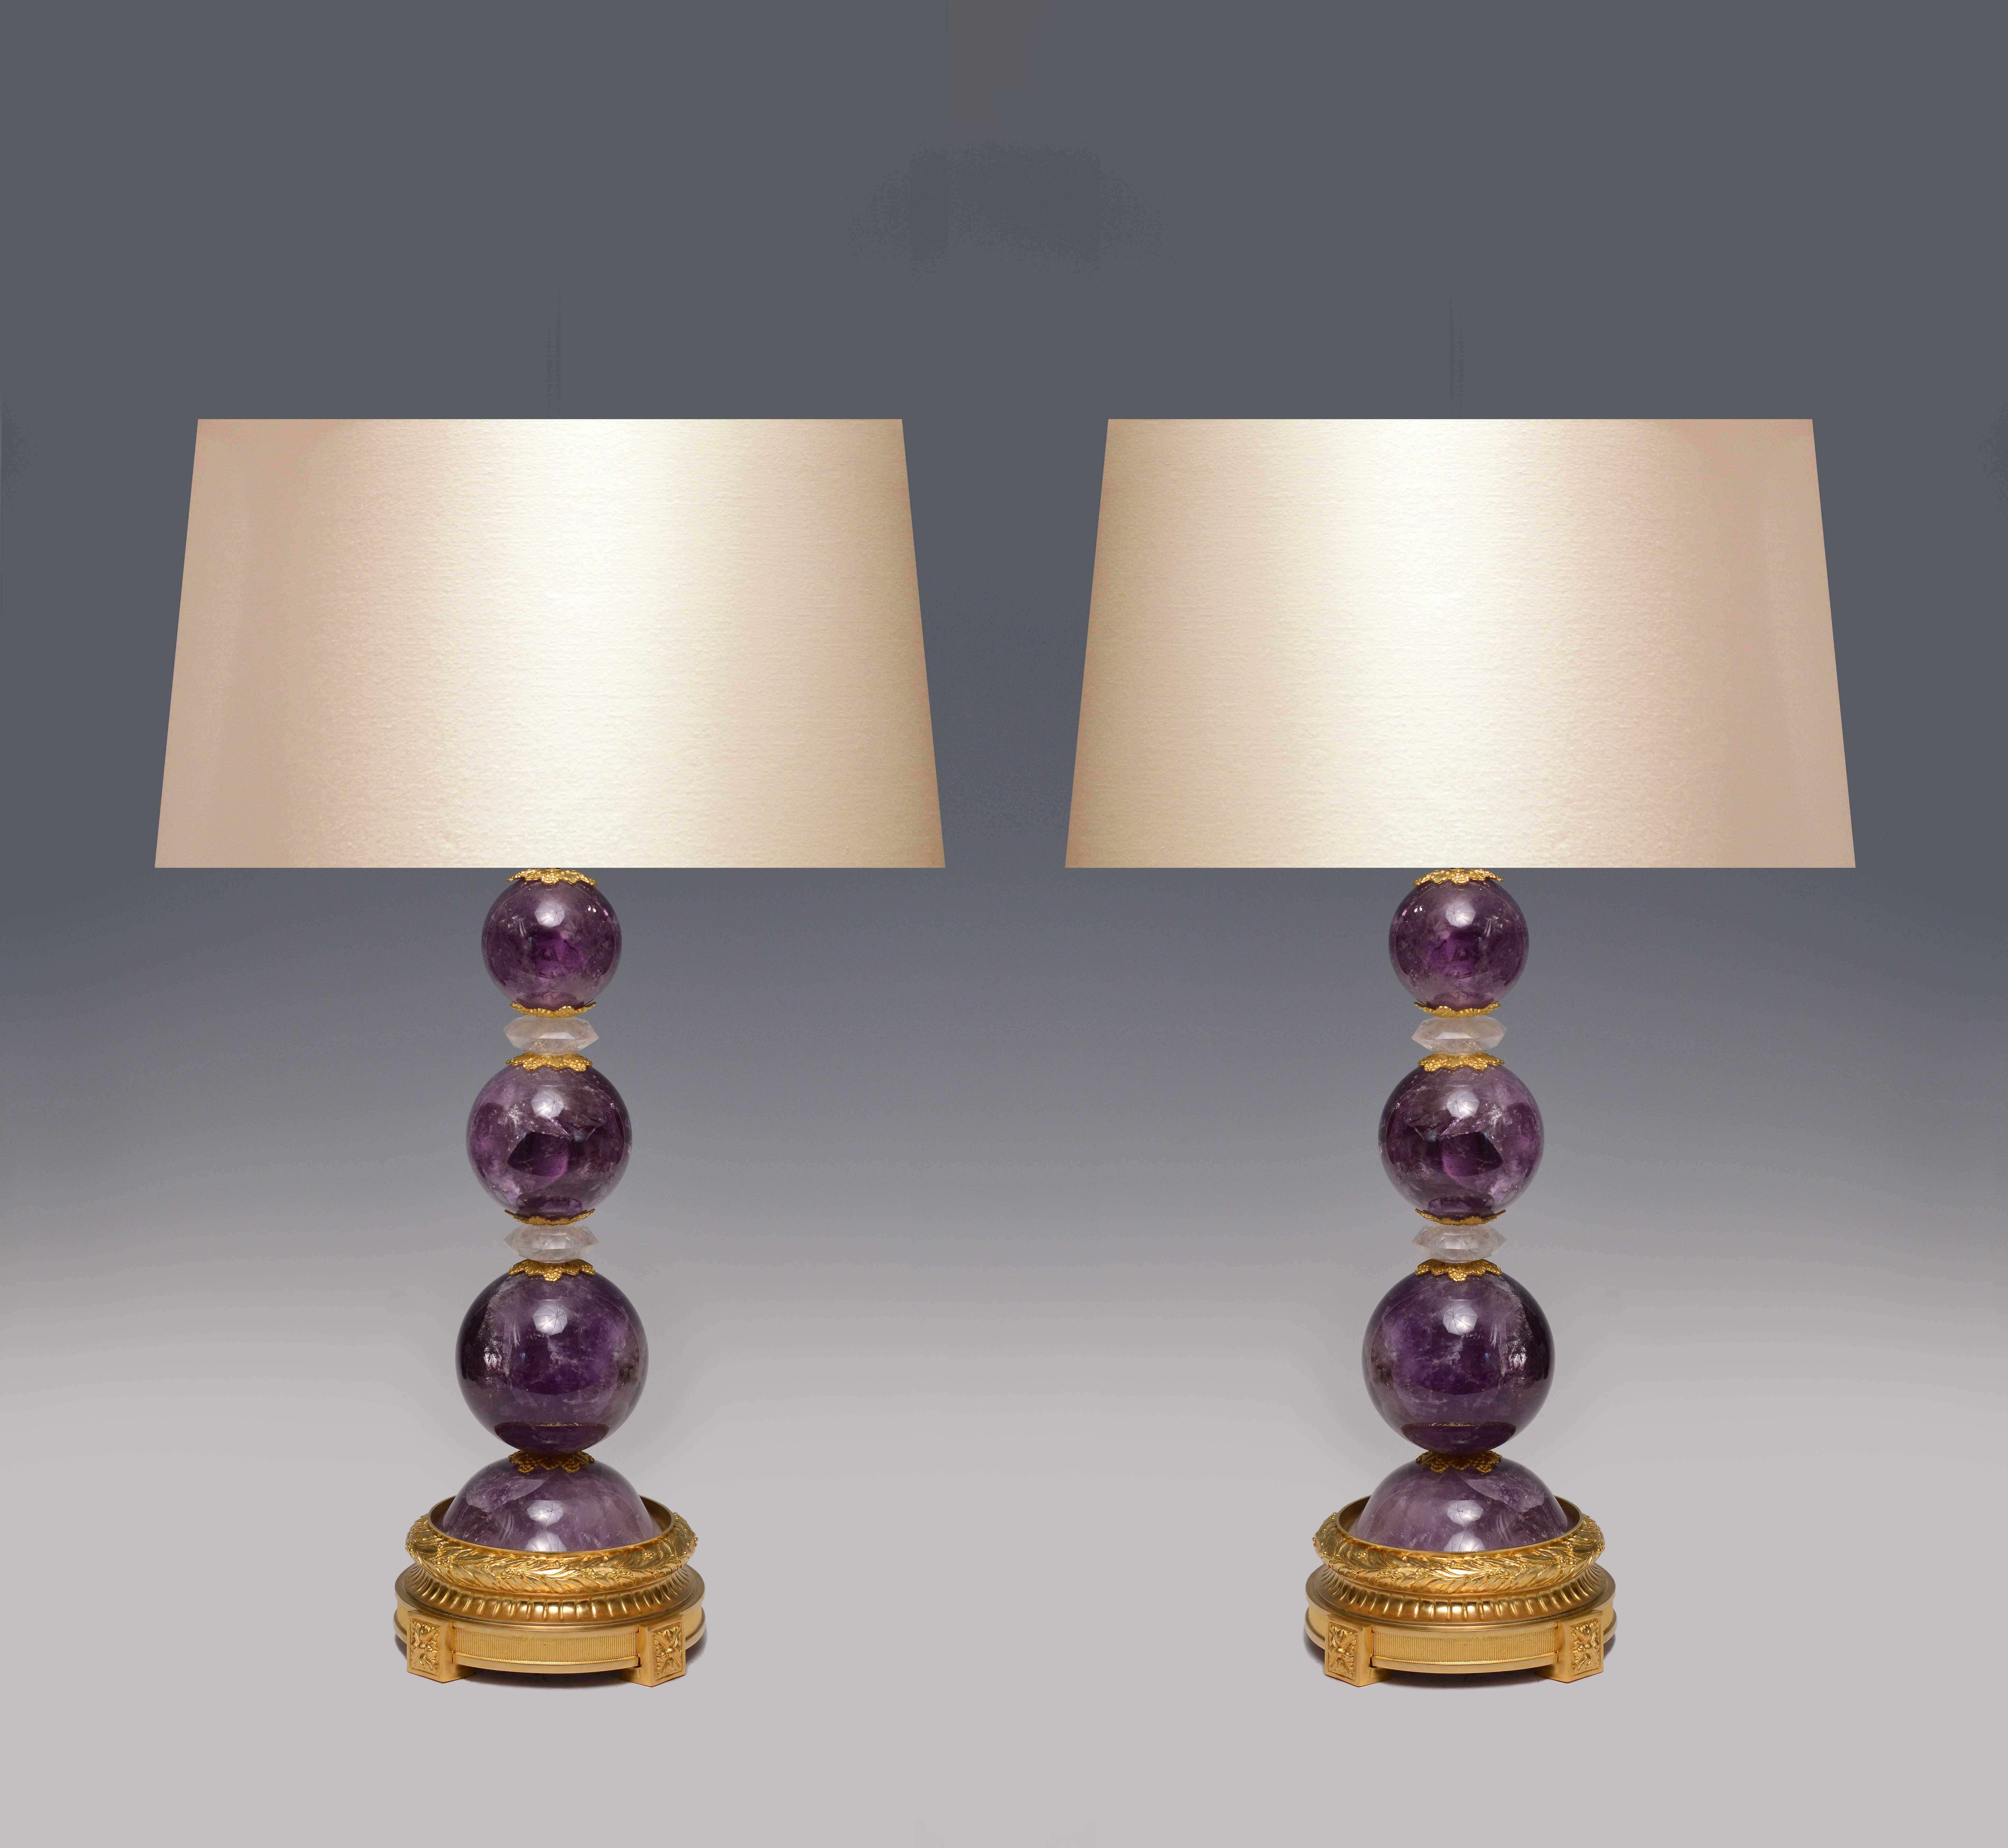 A global form amethyst rock quartz lamp with fine cast brass base, created by Phoenix Gallery, NYC.
To the rock crystal, measures 17